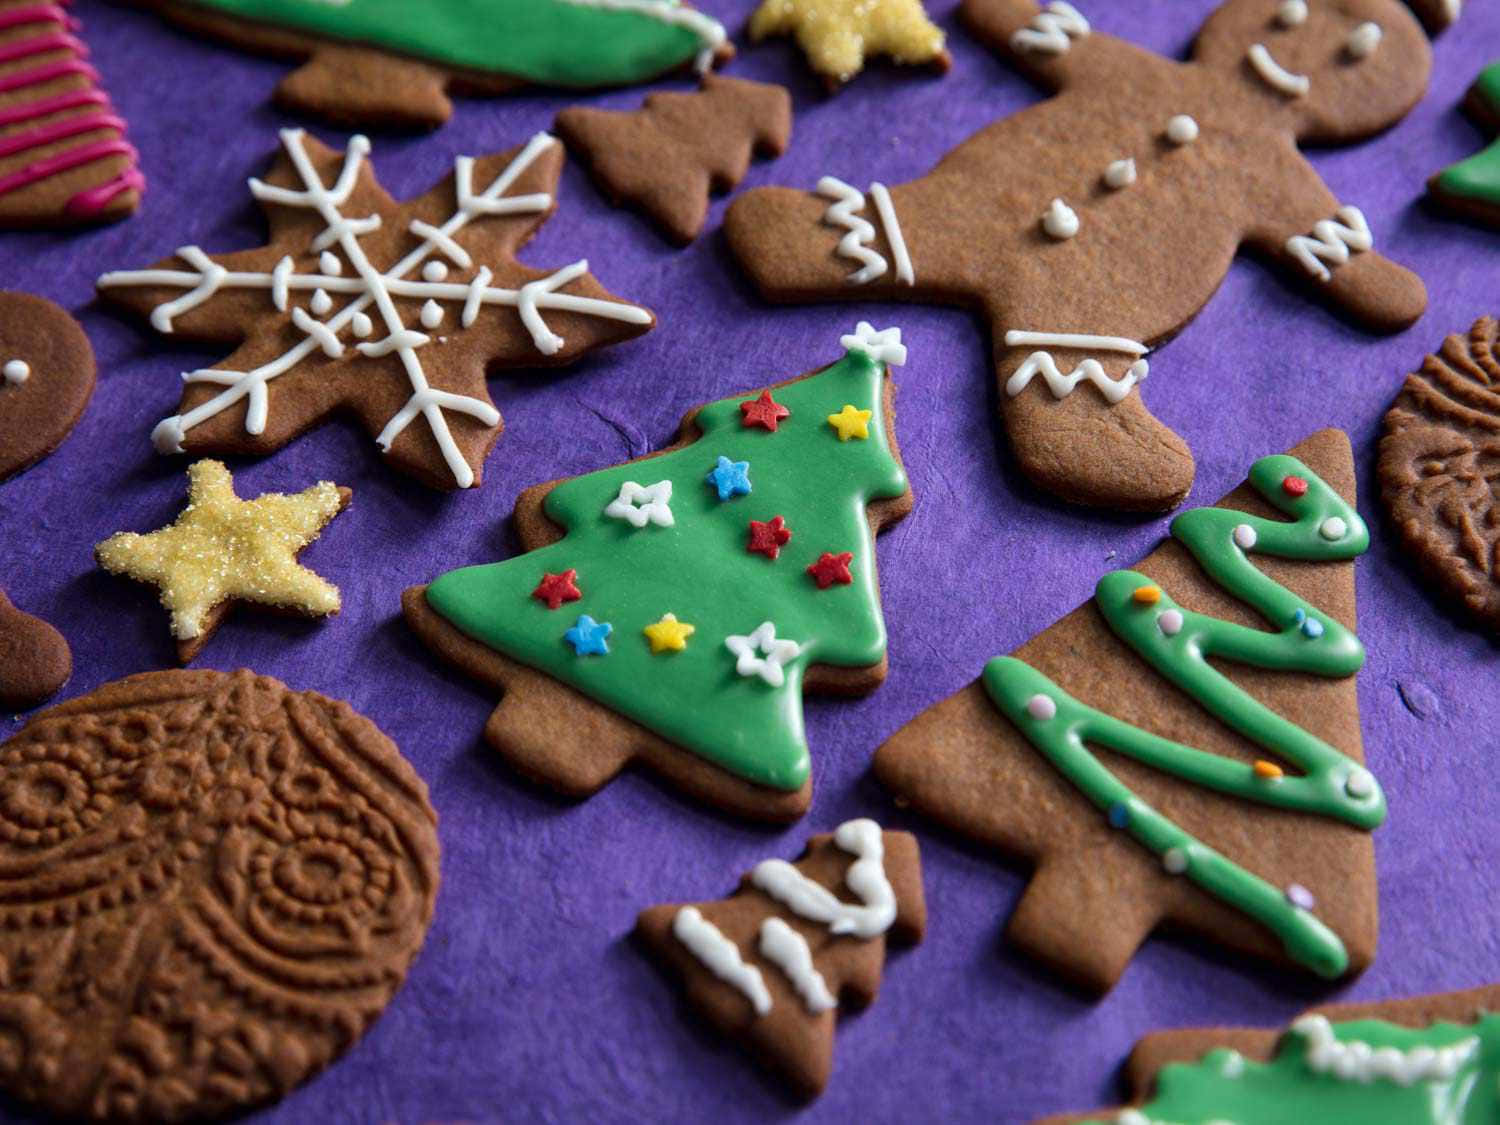 A Group Of Christmas Cookies With Decorations On Them